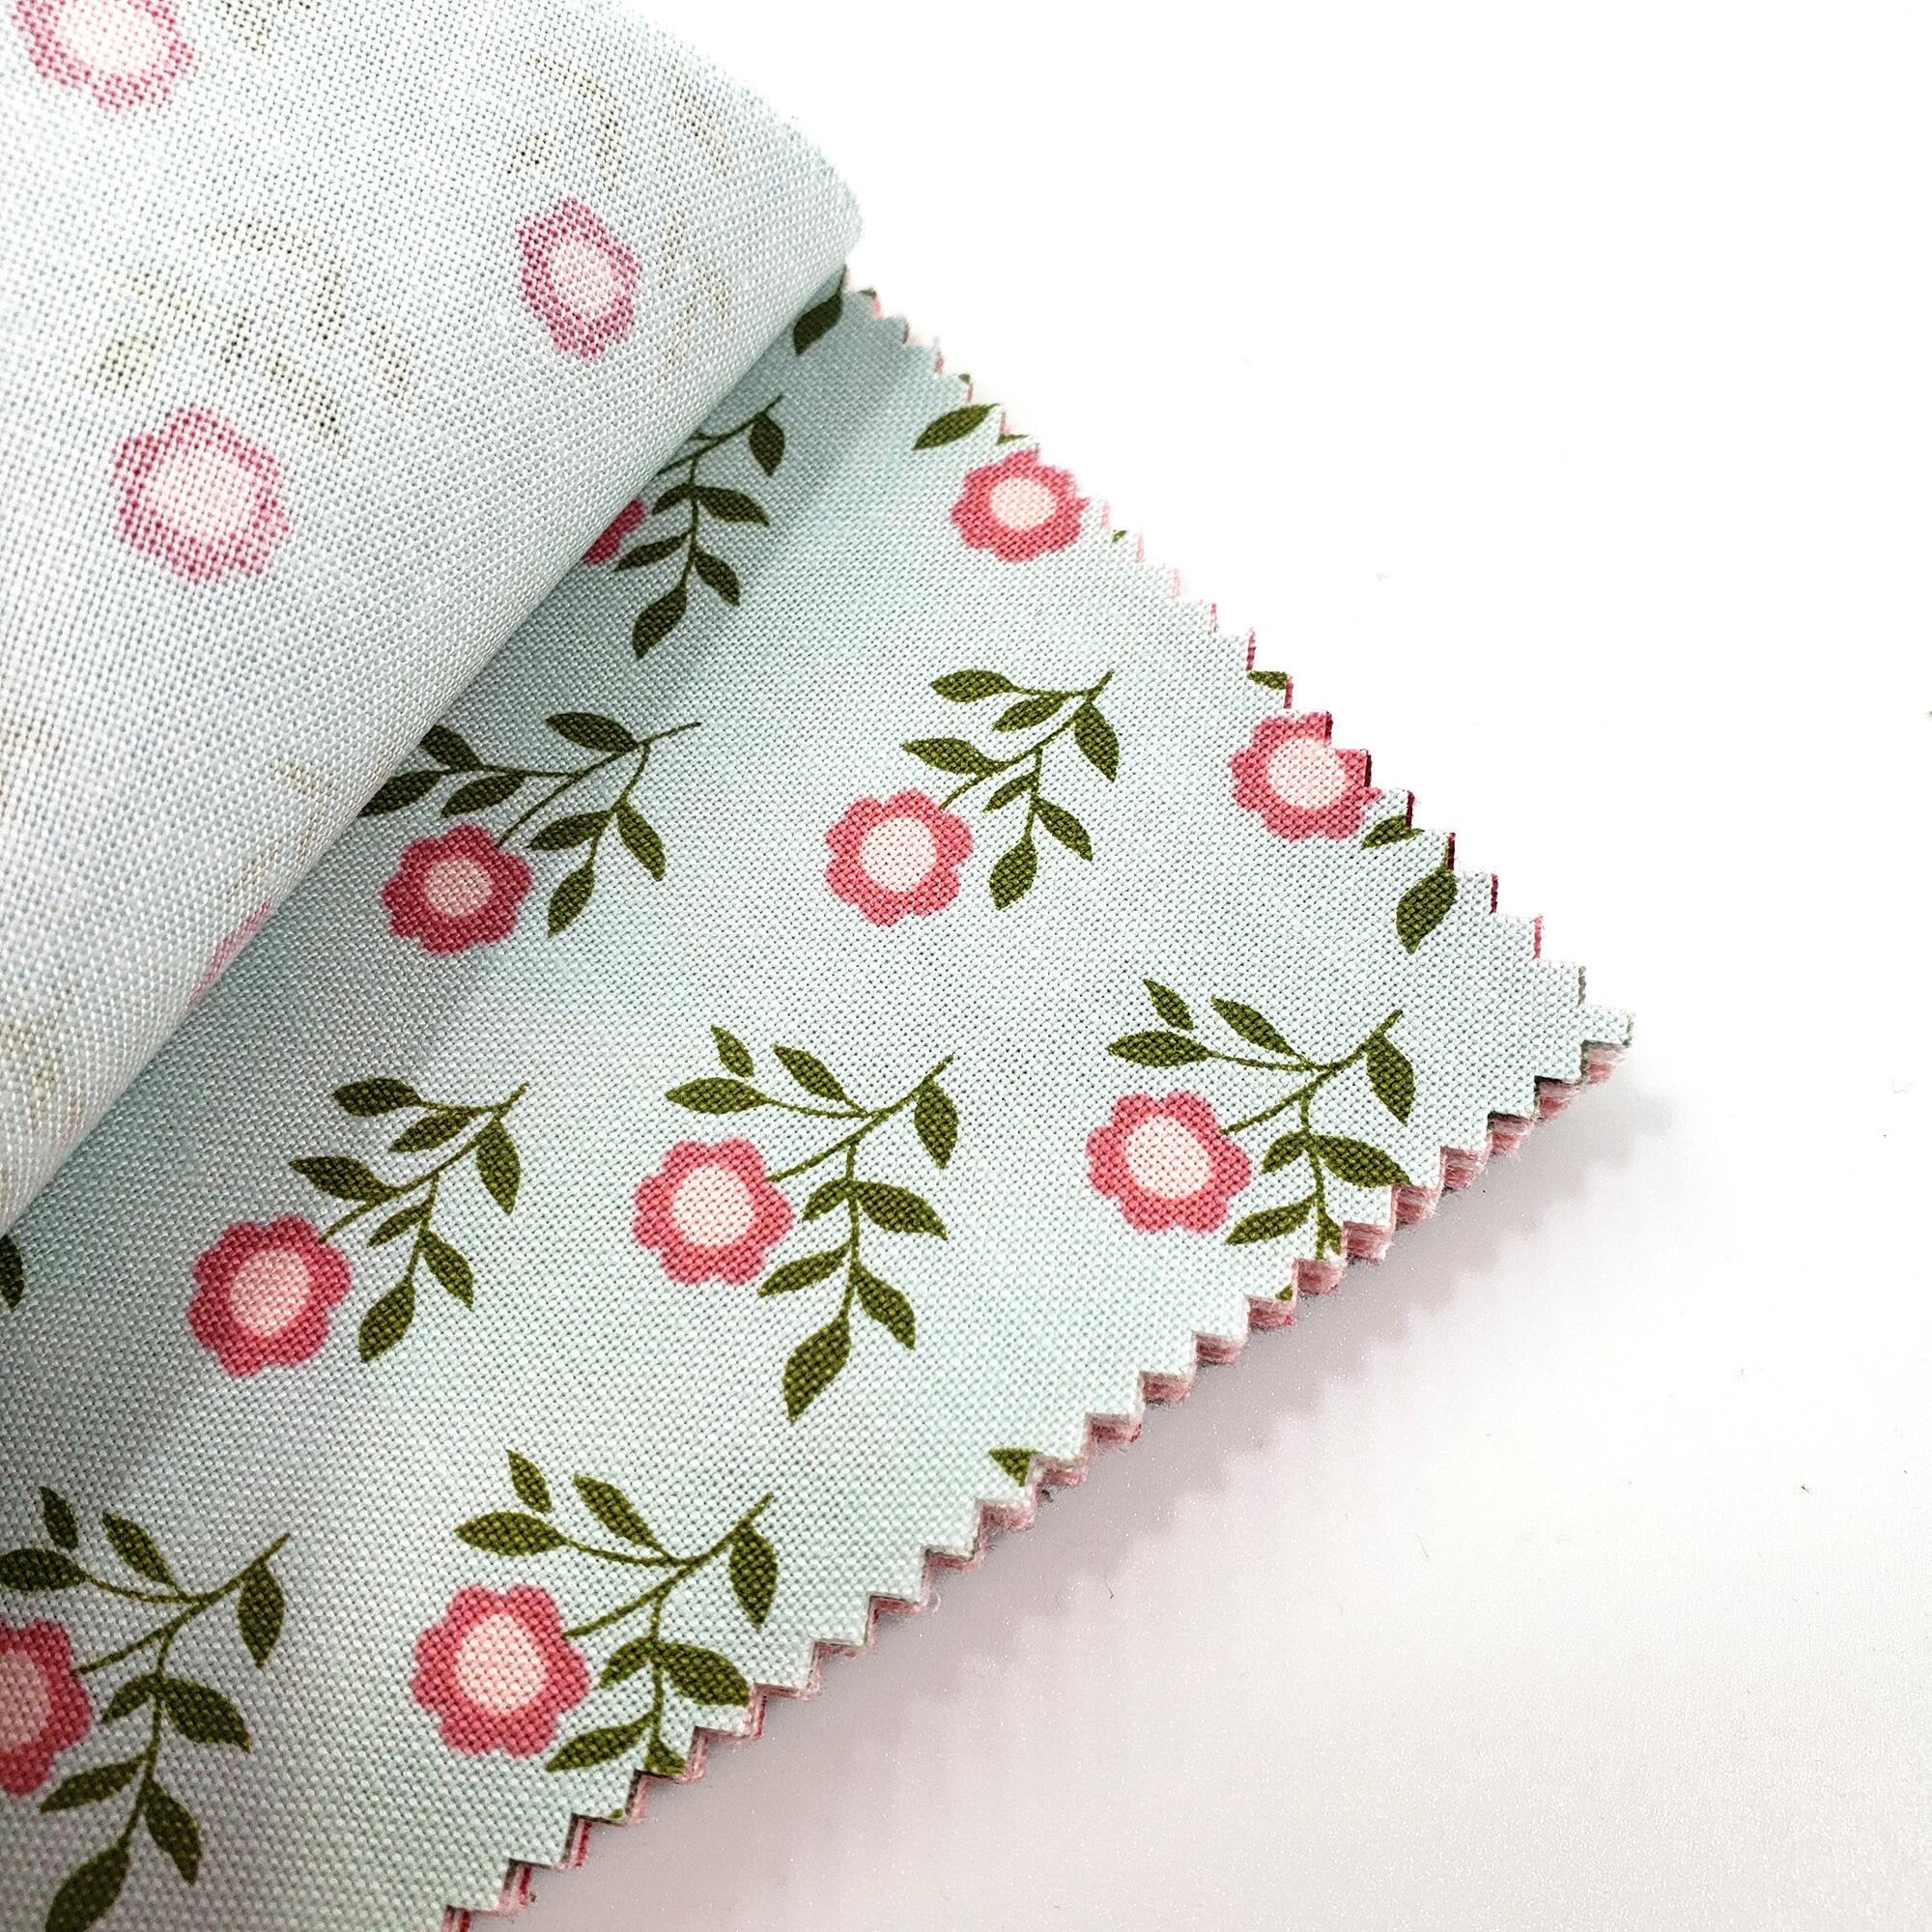 charm,squares,cotton,precut,roses,pink,spots,polka,flowers,green,lella boutique,moda numbers,stripes,vintage,chic,kitsch,lovestruck